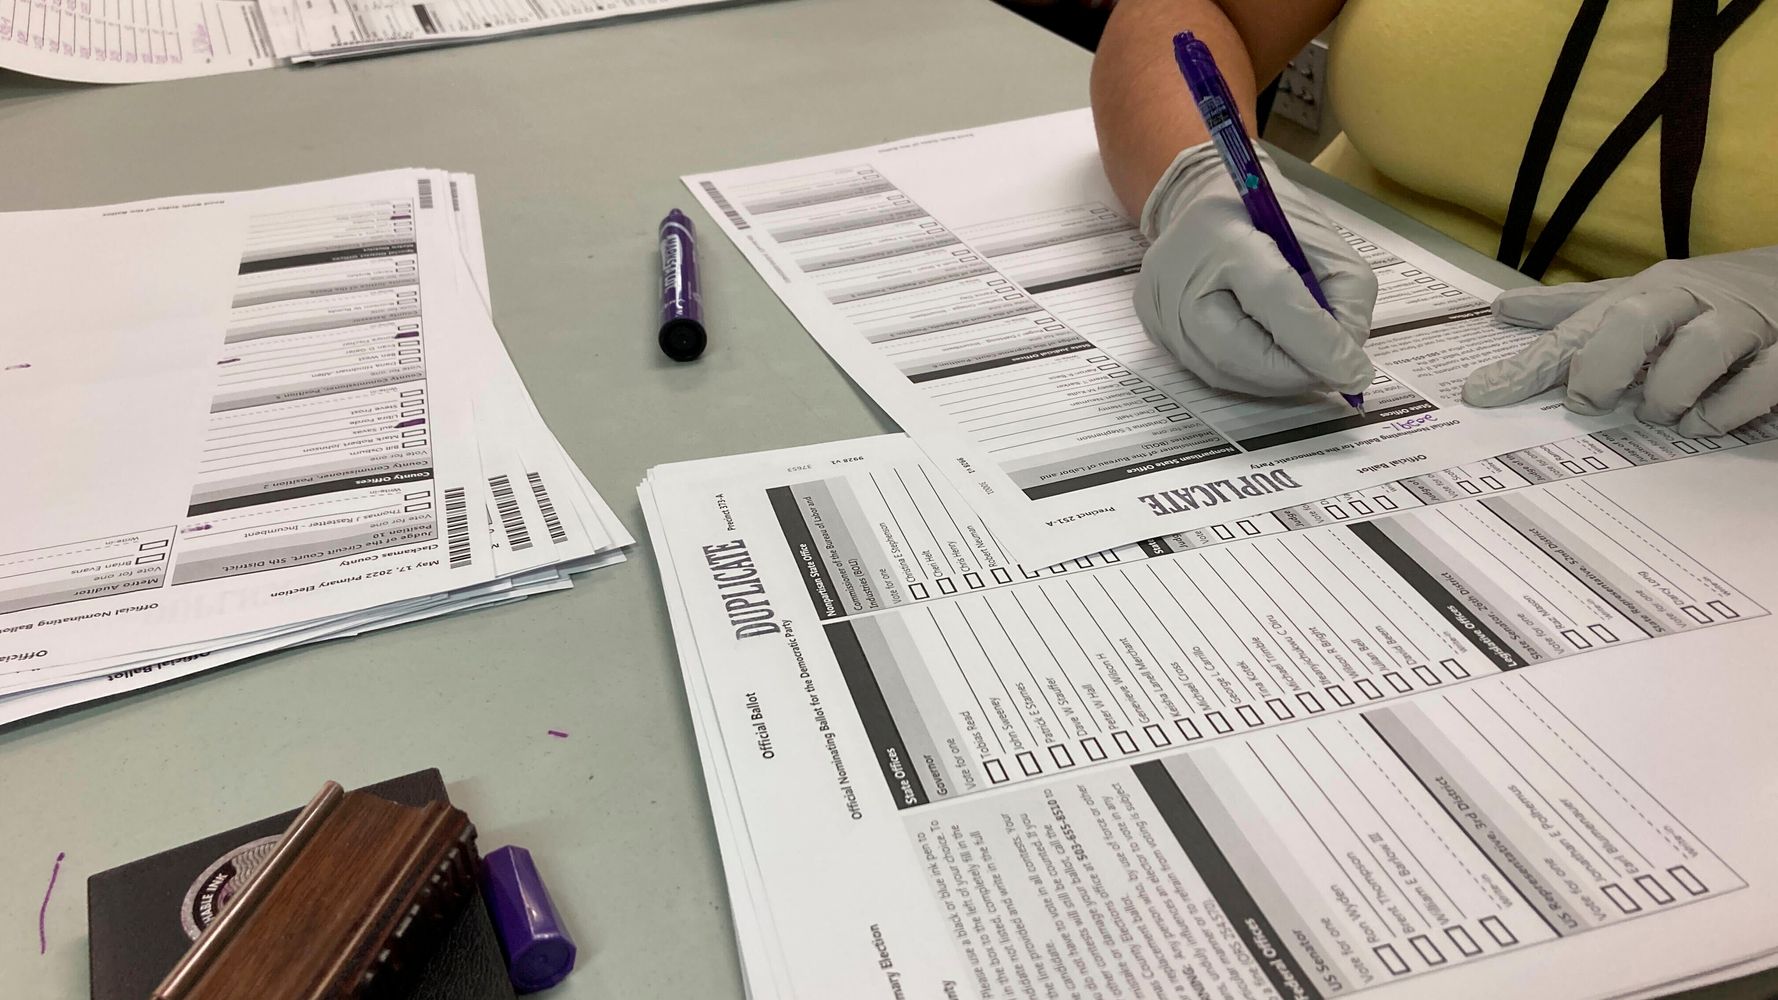 Printing Errors Force Election Officials To Redo Mailed Ballots In Oregon, Pennsylvania